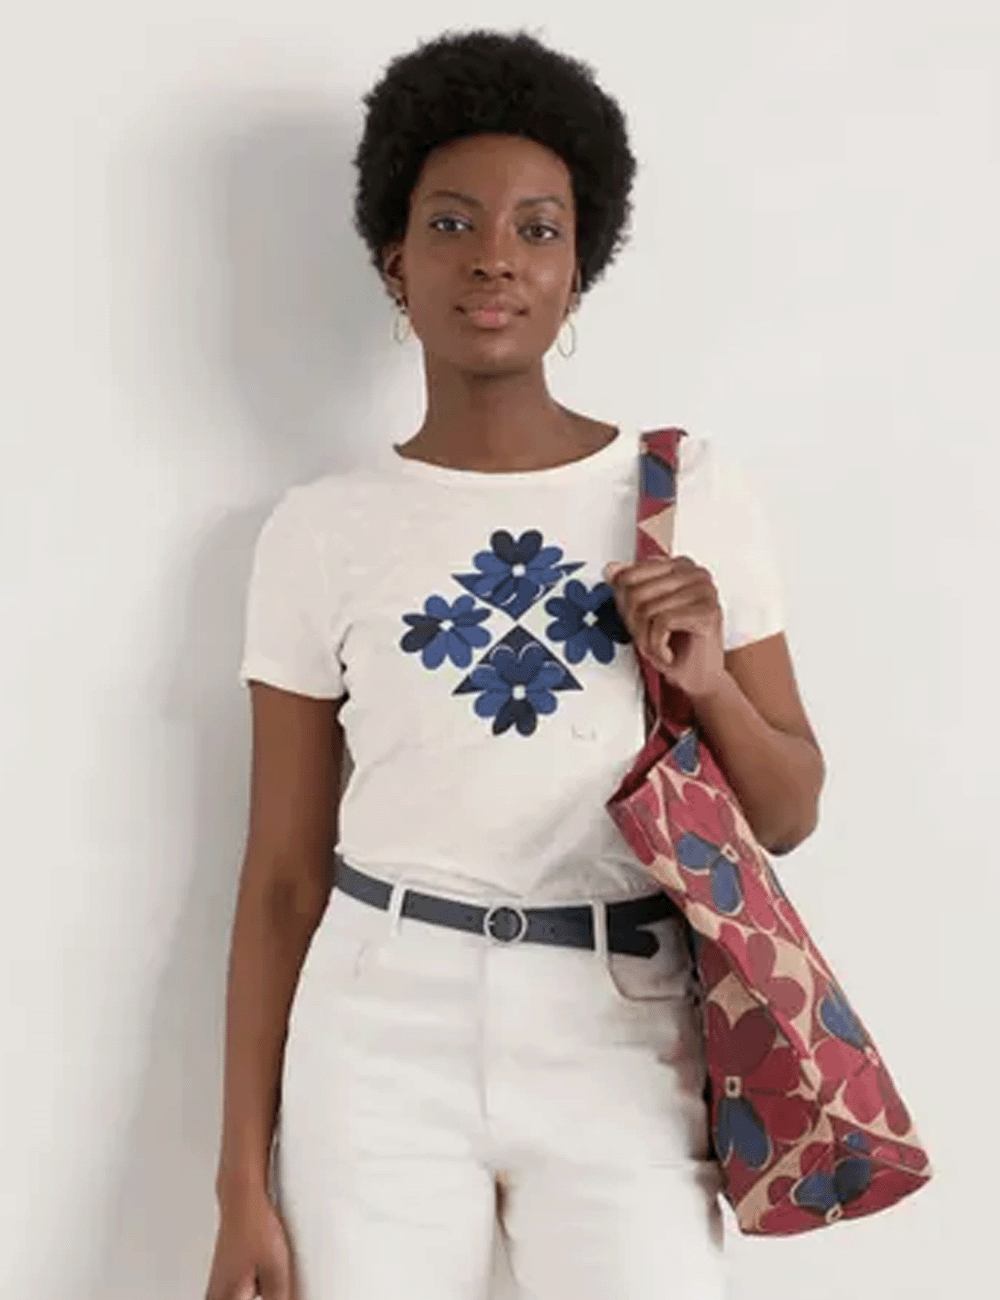 Woman wearing the Printing Ink T-Shirt with white jeans holding a bag over her shoulder